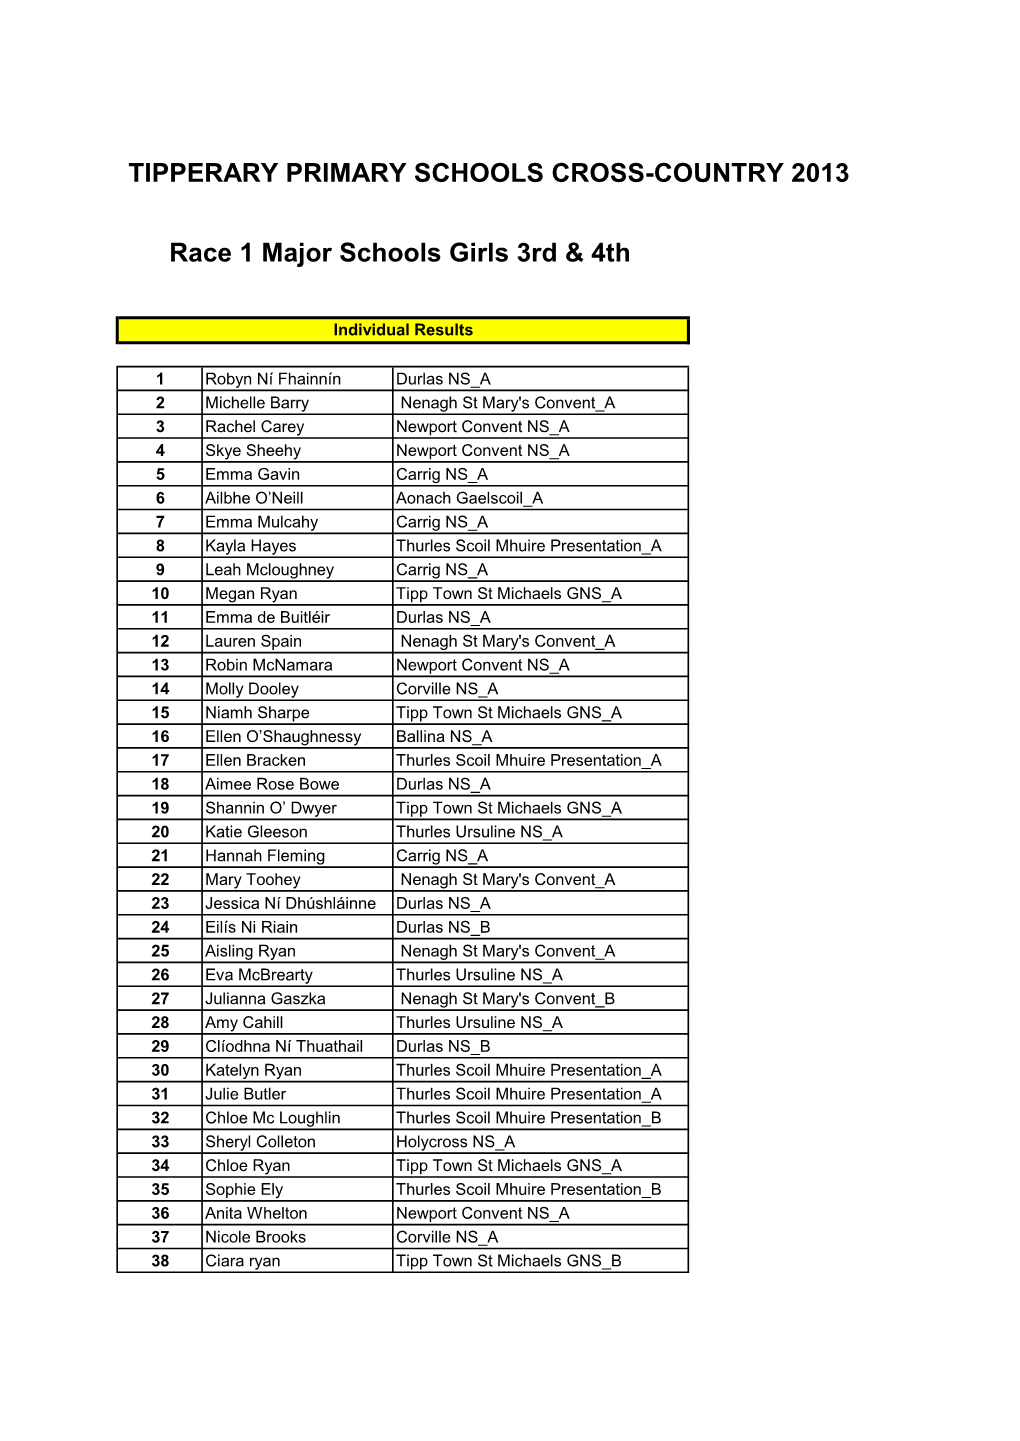 TIPPERARY PRIMARY SCHOOLS CROSS-COUNTRY 2013 Race 1 Major Schools Girls 3Rd &